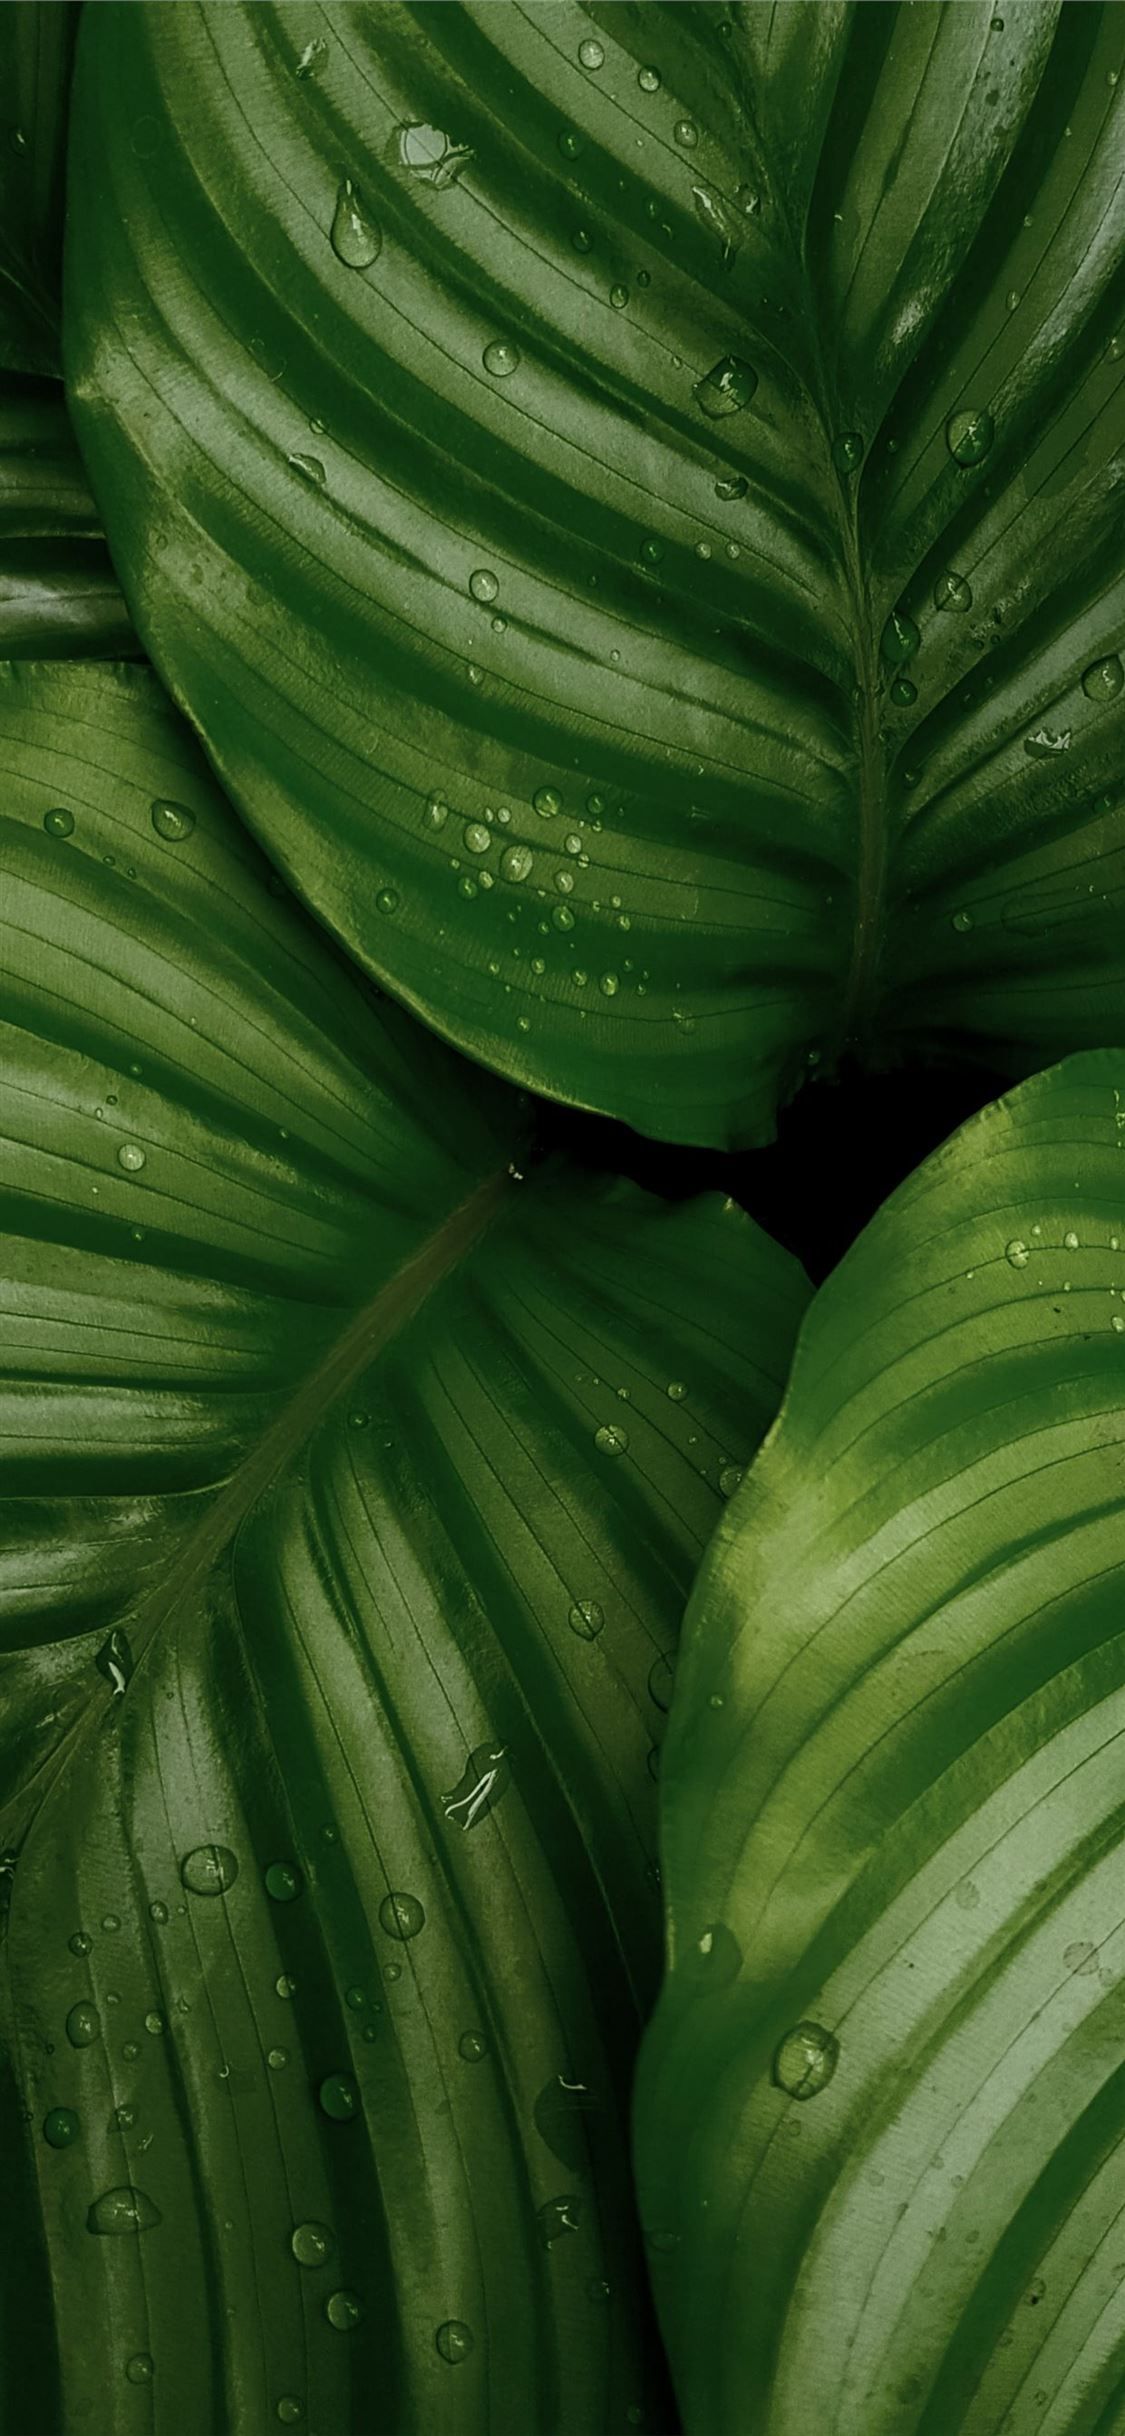 water droplets on green leaves iPhone X Wallpaper Free Download